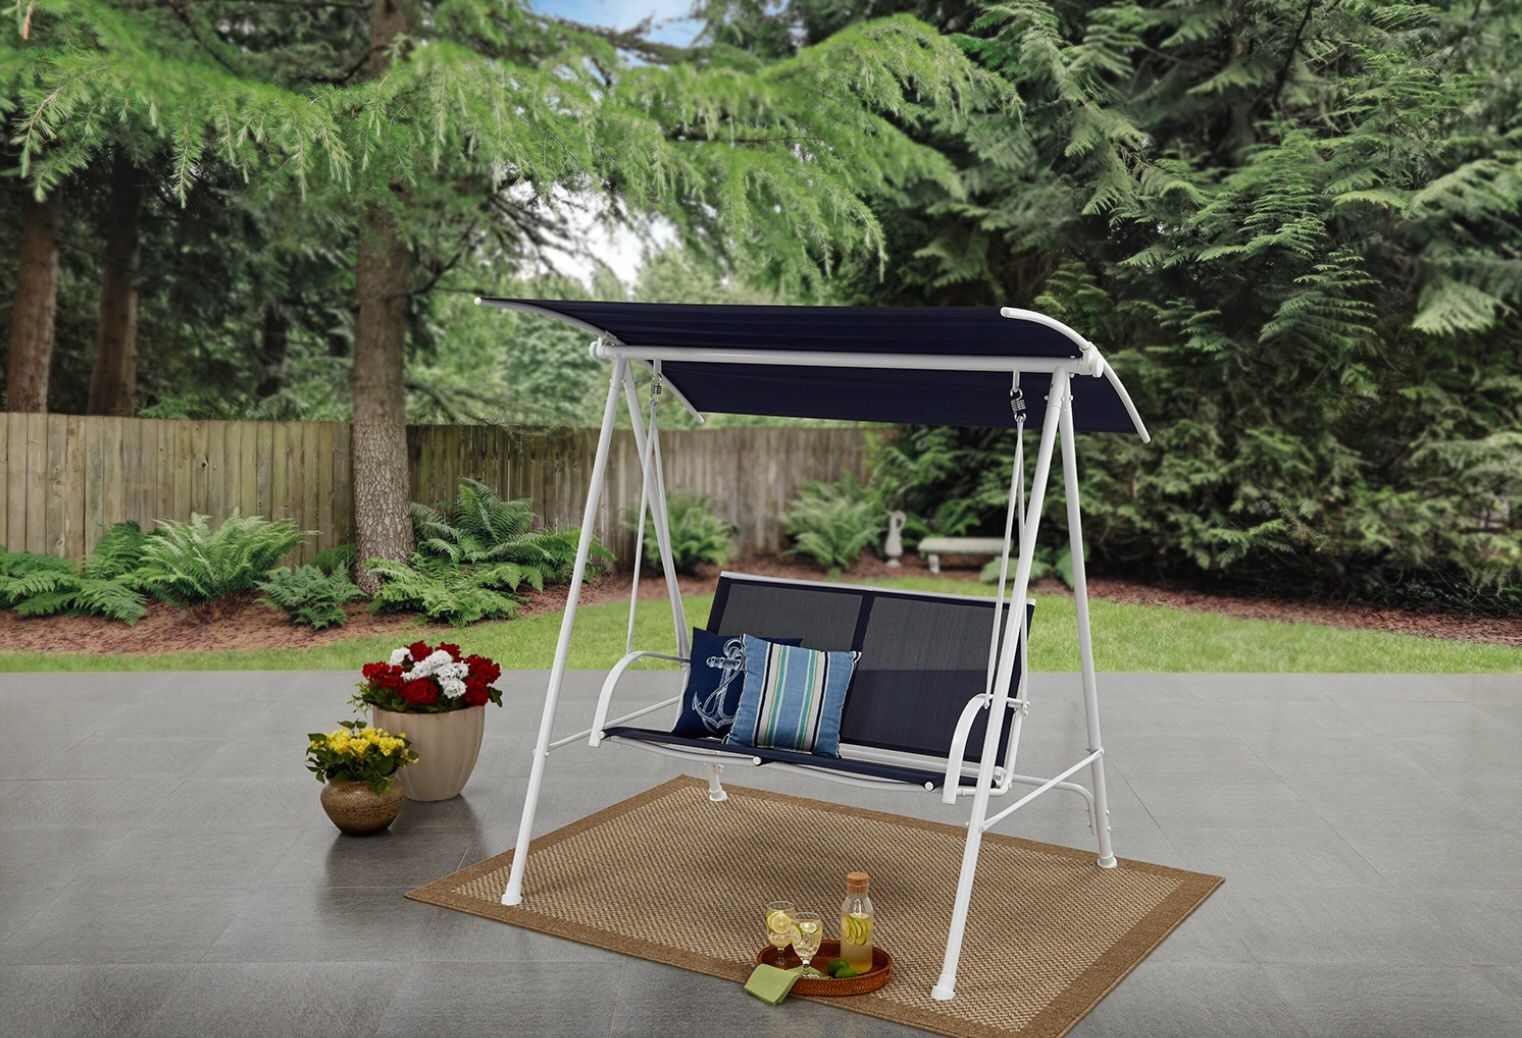 2 Person Canopy Patio Garden Yard Porch Swing Outdoor Furniture Sling Seats In Blue